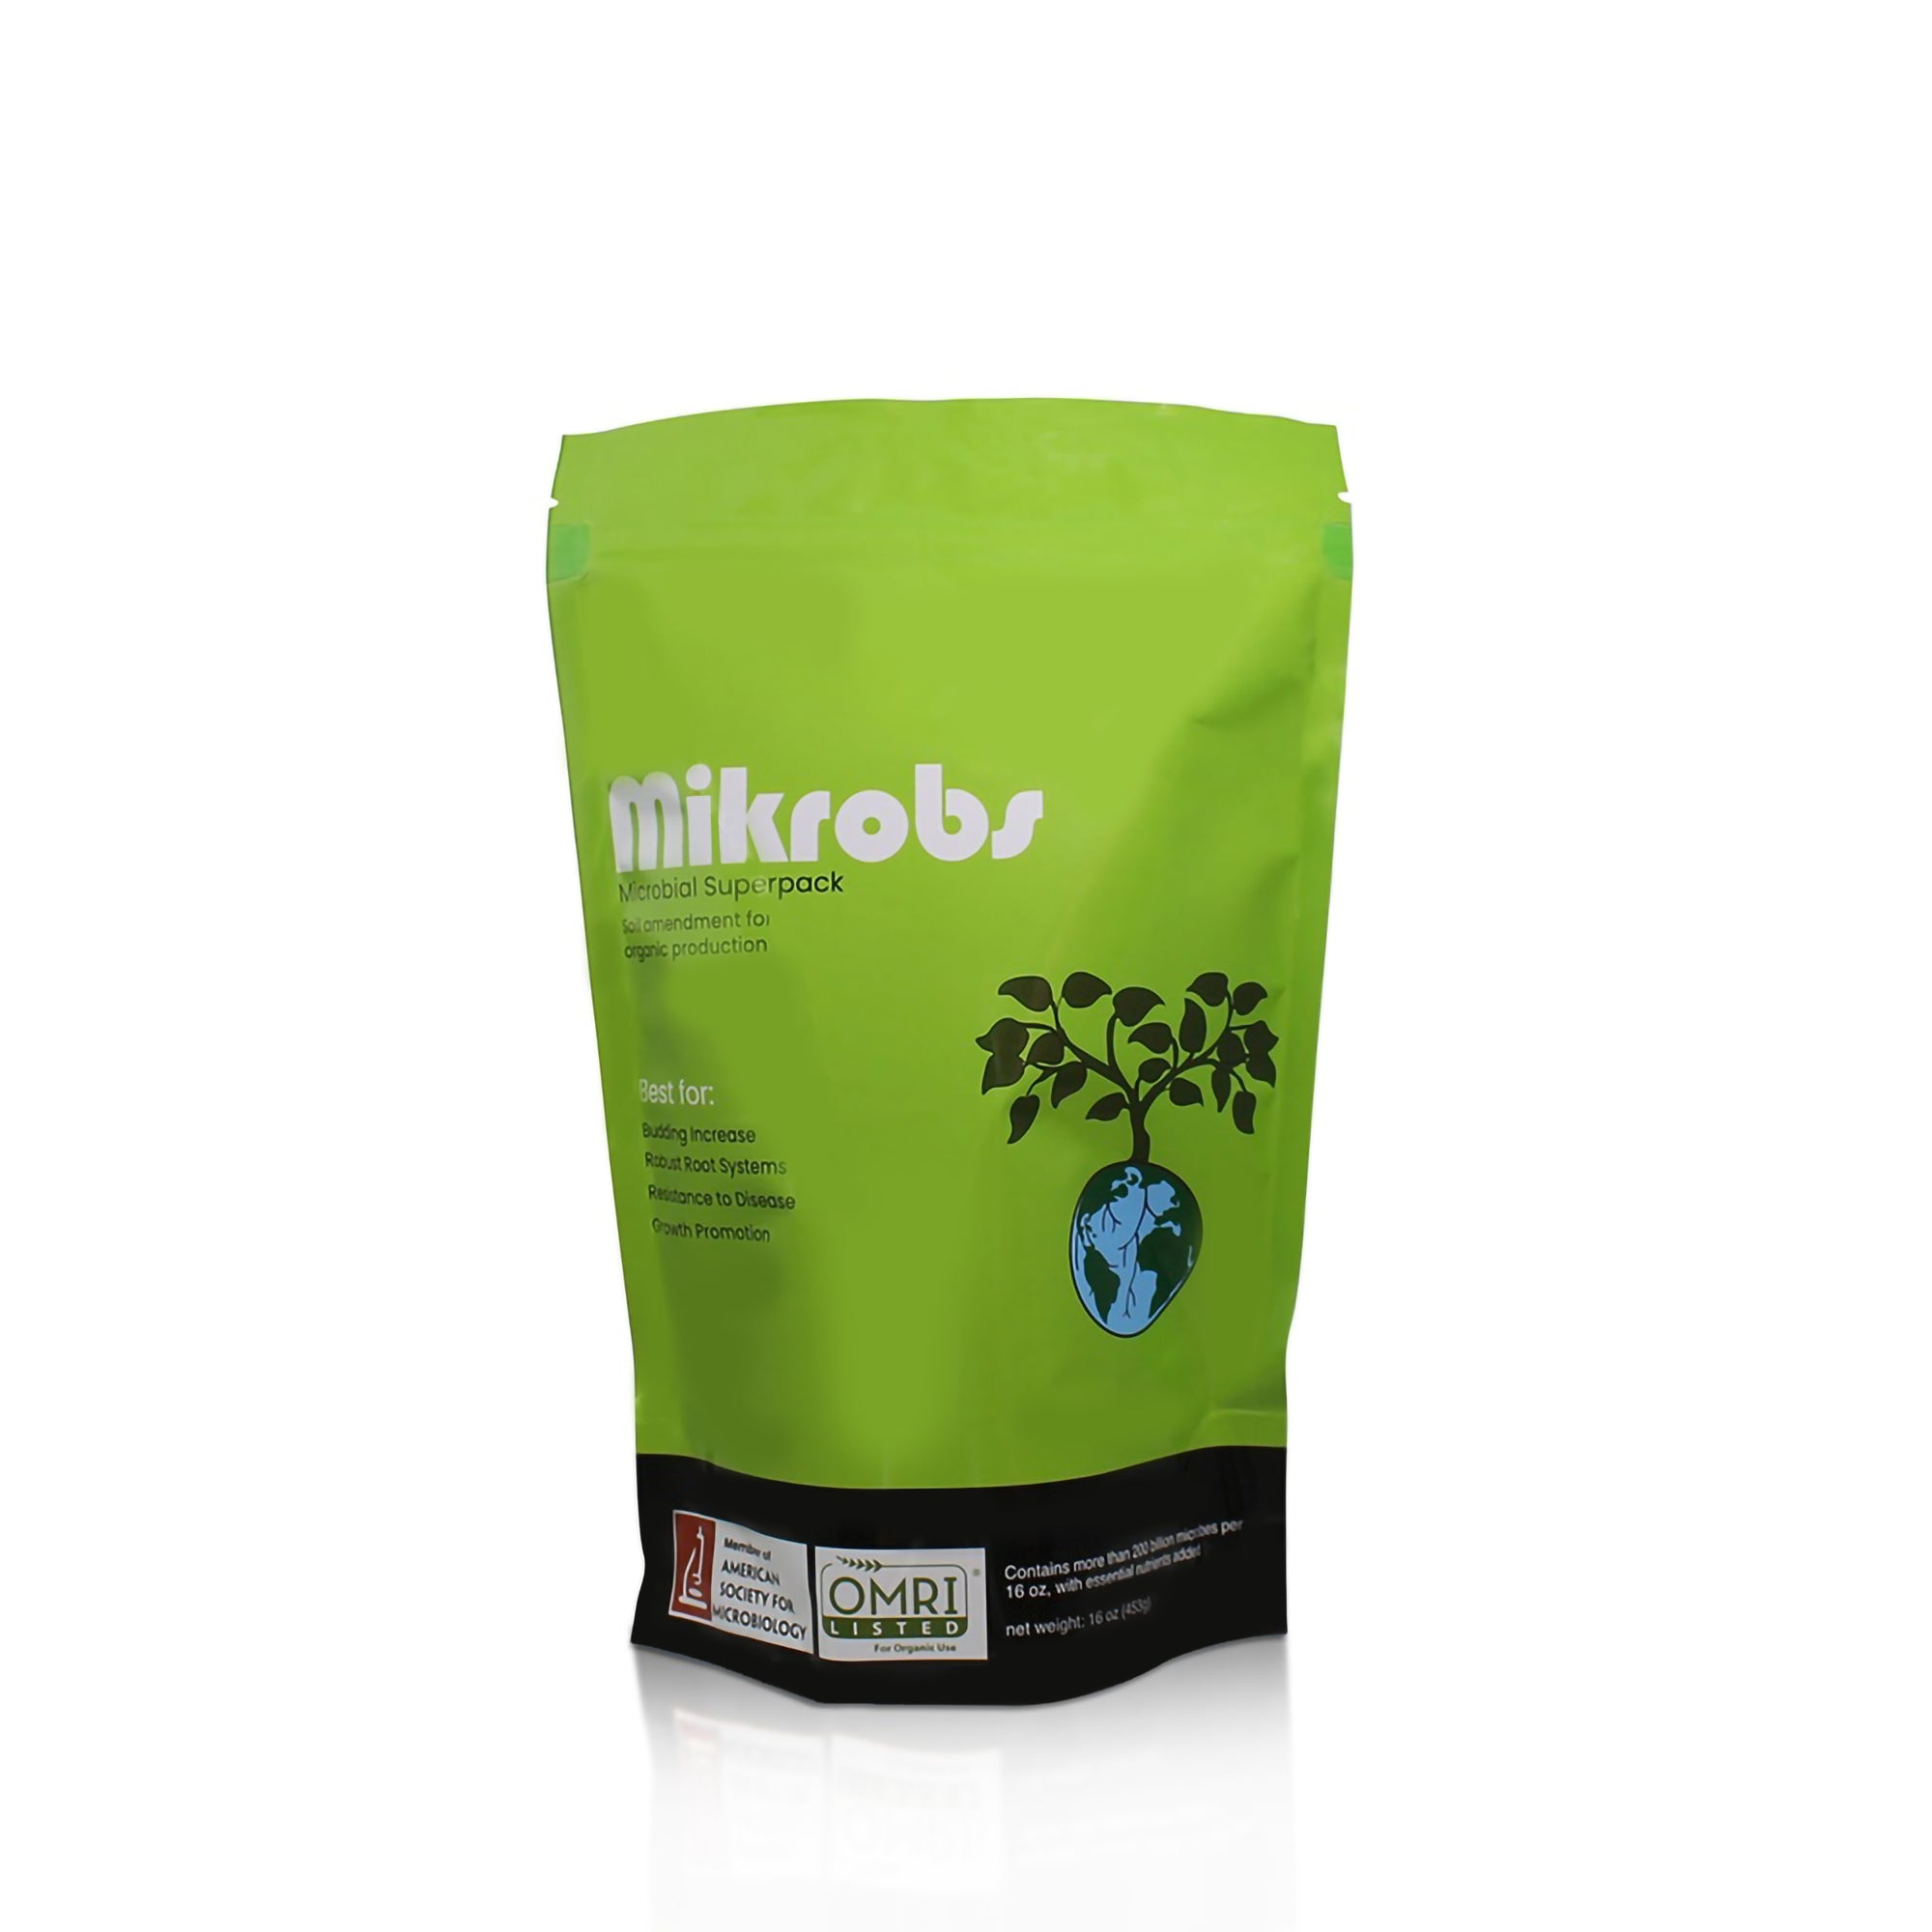 Mikrobs- Microbial Superpack 1 lb.